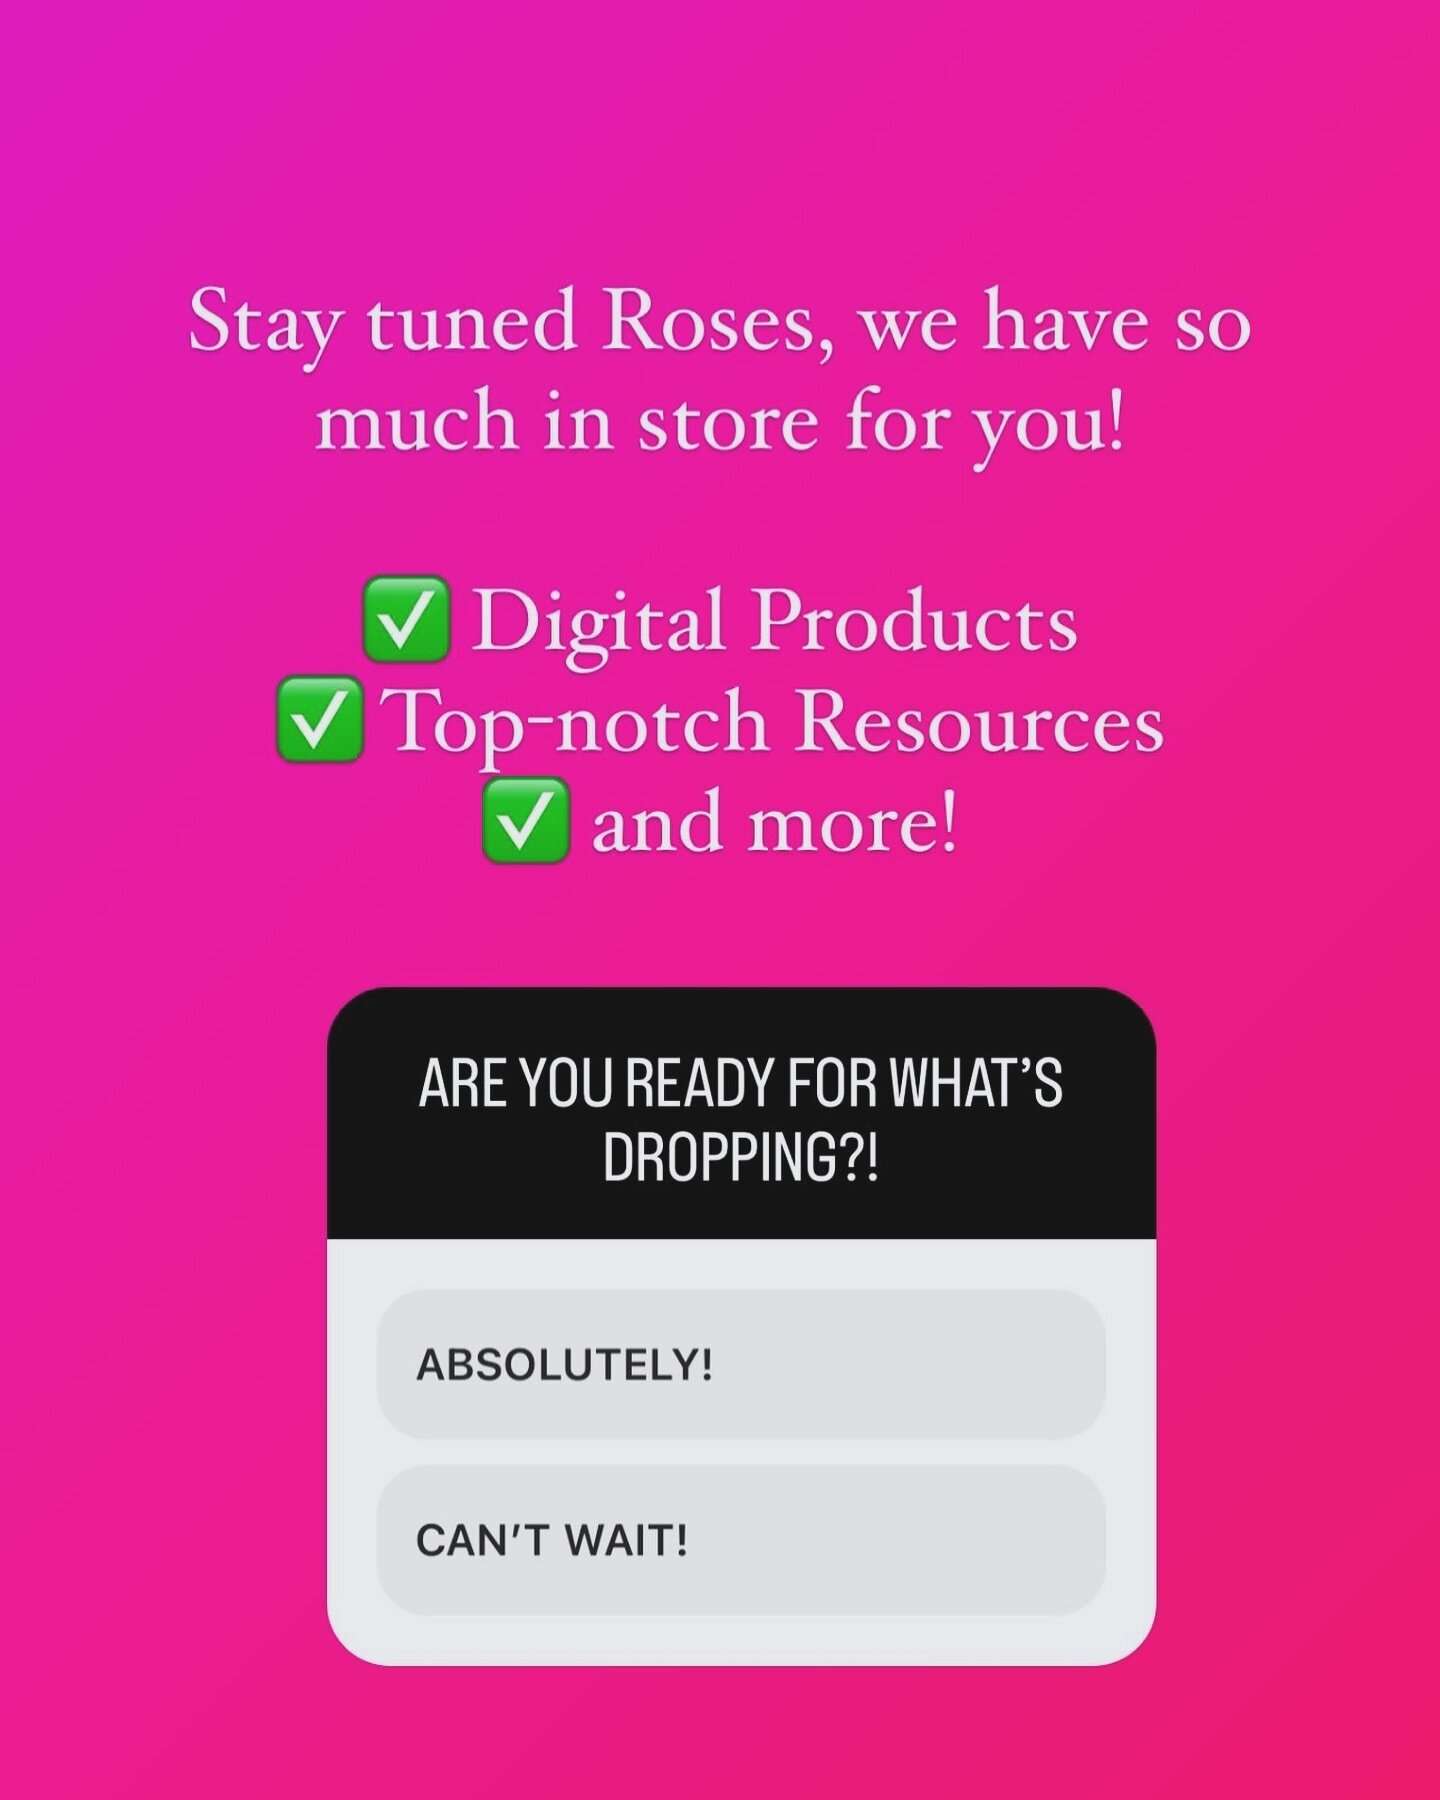 What do you think we have coming your way?!

Comment below! 🌹

#socialmediamanager #digitalproducts #digitalmedia #digitalmarketing